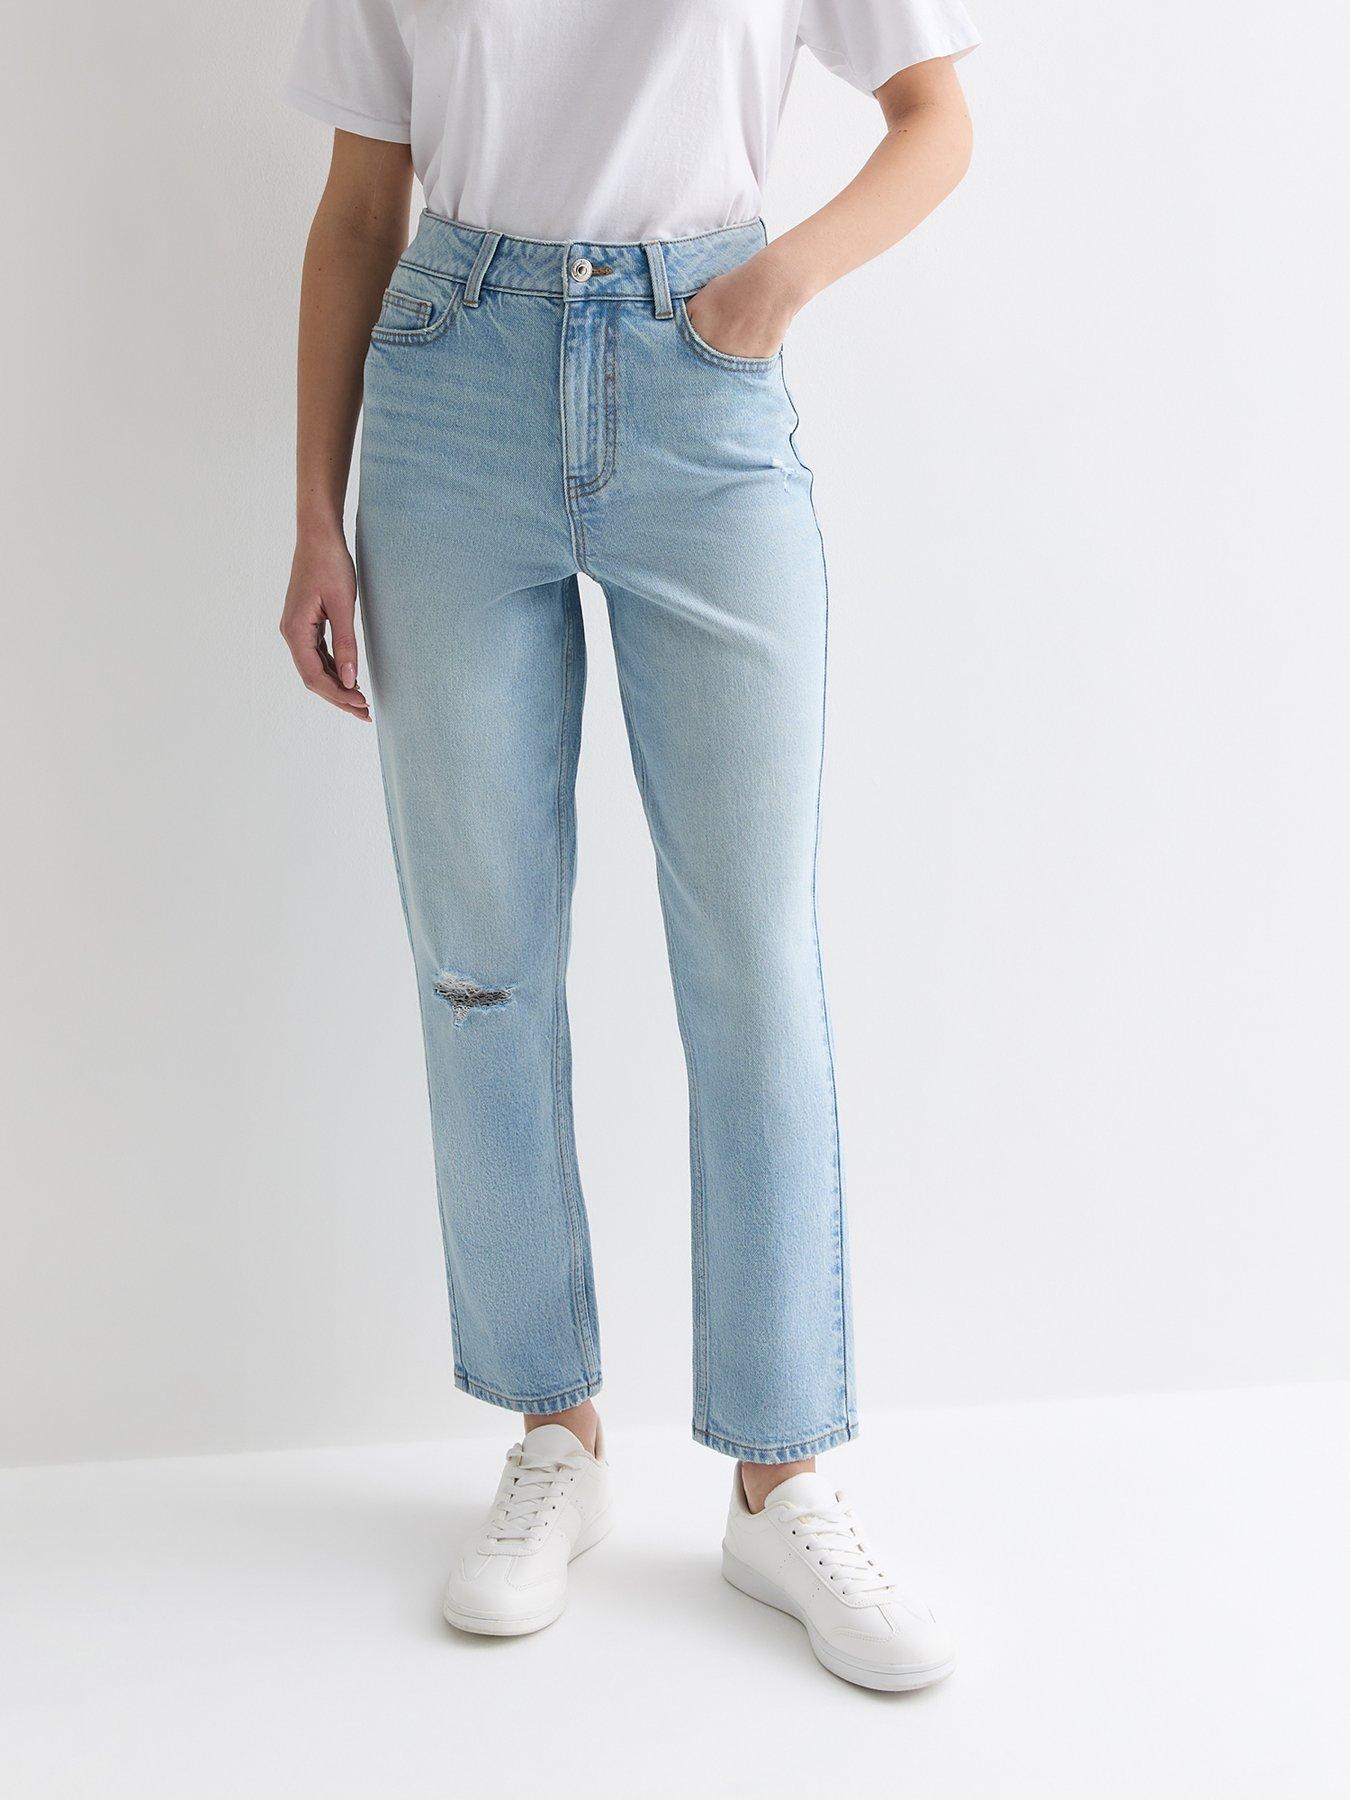 580 Best MOM Jeans ideas  mom jeans, clothes, fashion inspo